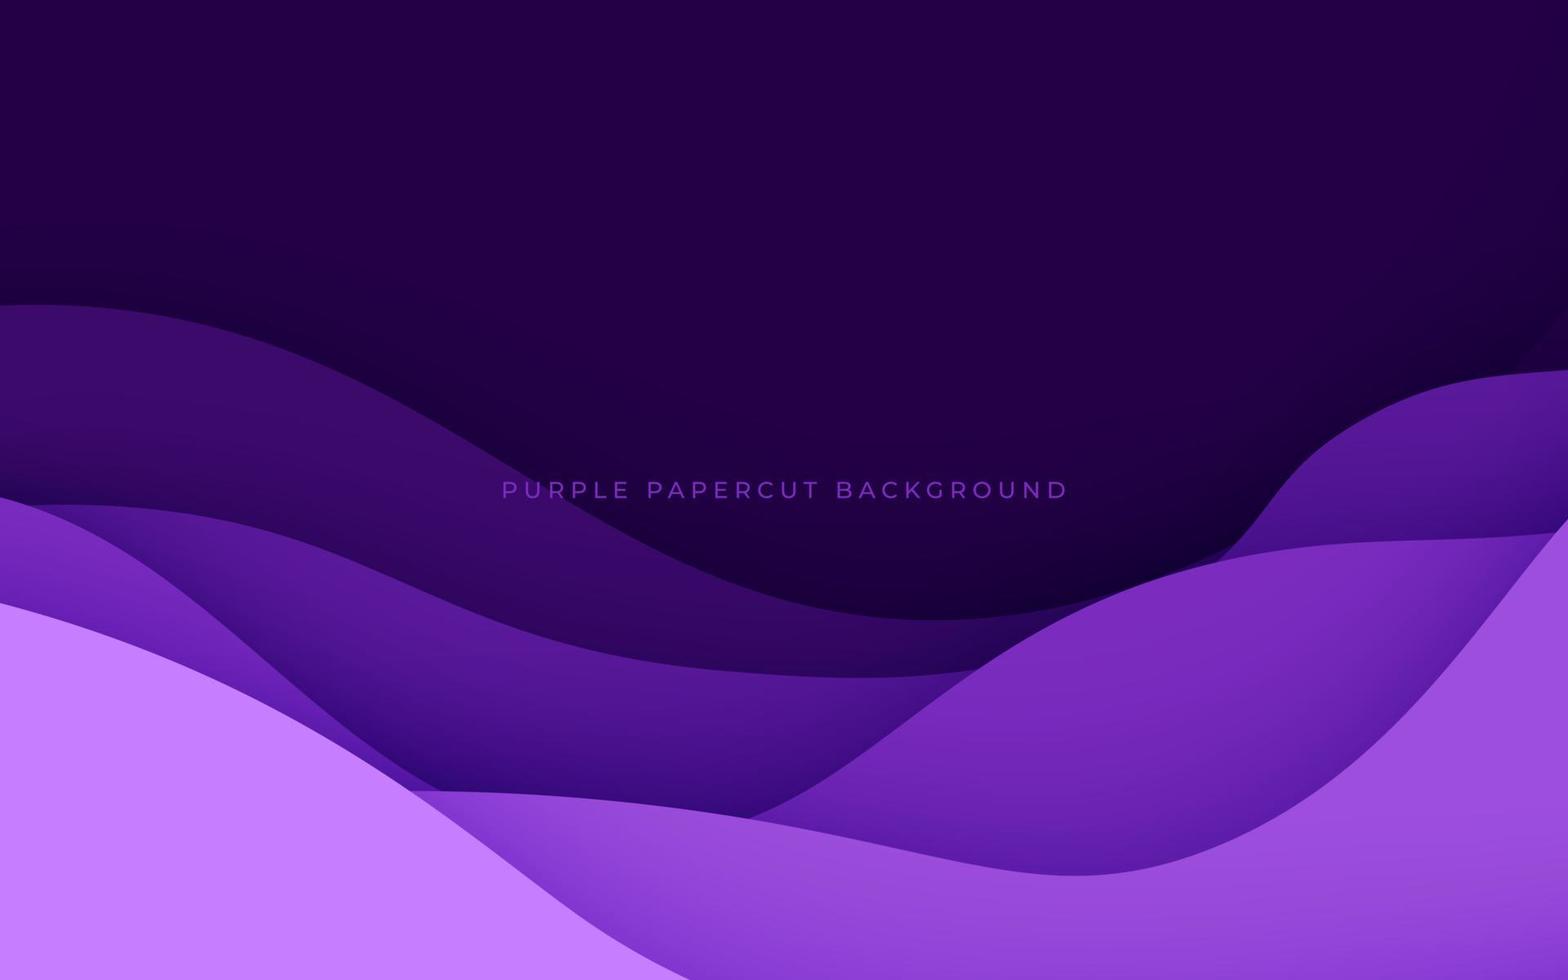 abstract purple color dynamic wavy overlap layers papercut background. eps10 vector